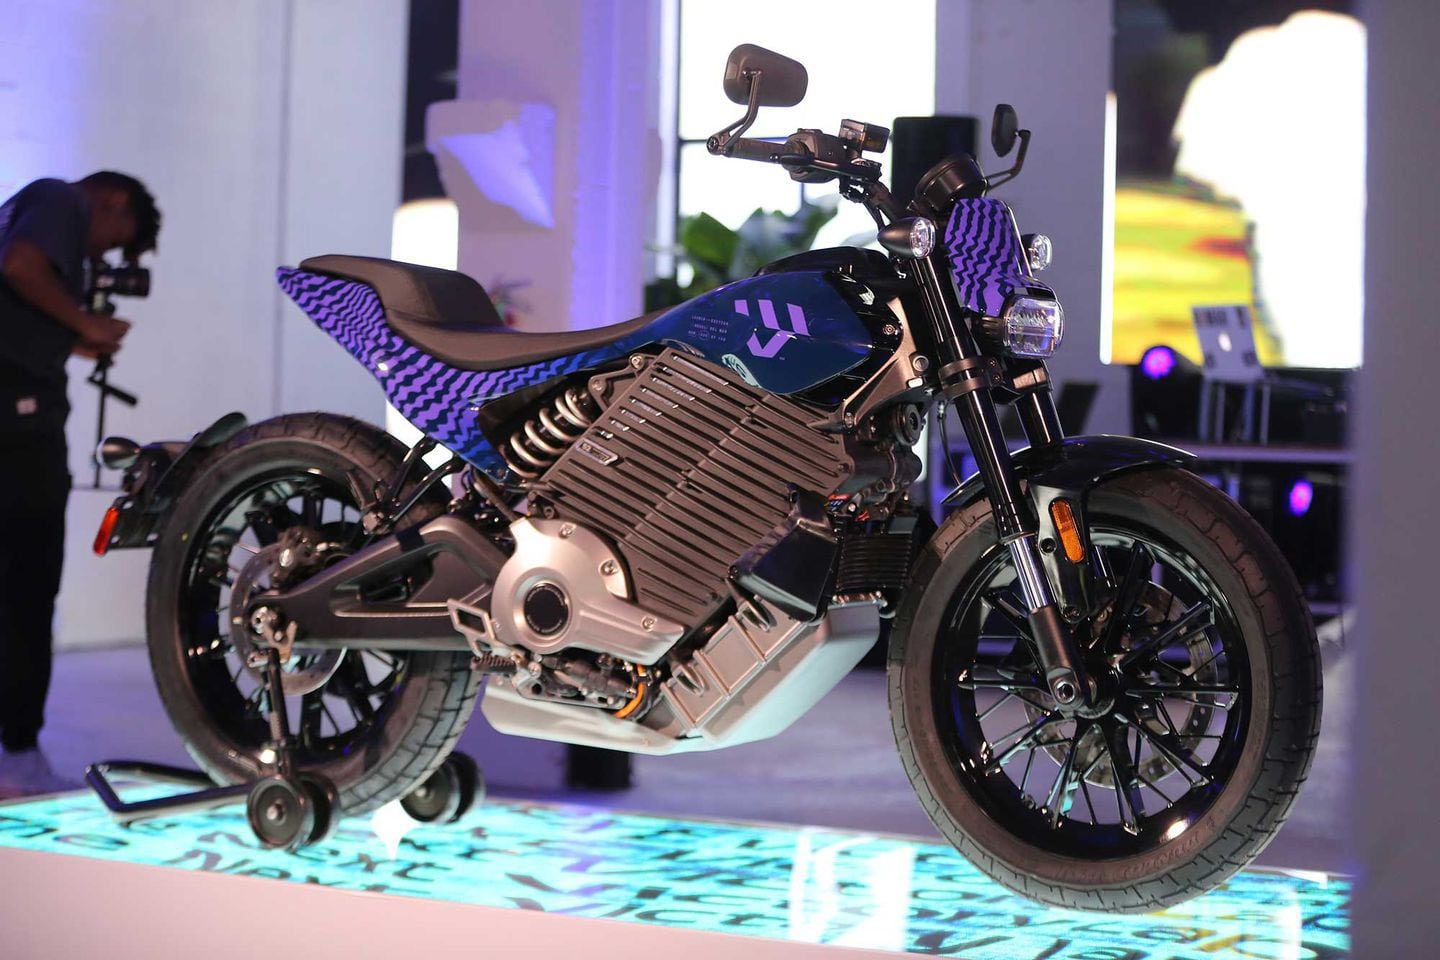 We took a look at the LiveWire Del Mar Launch Edition last May, and the production version of the bike will likely be the same except for some details - but we haven't seen it in metal yet.